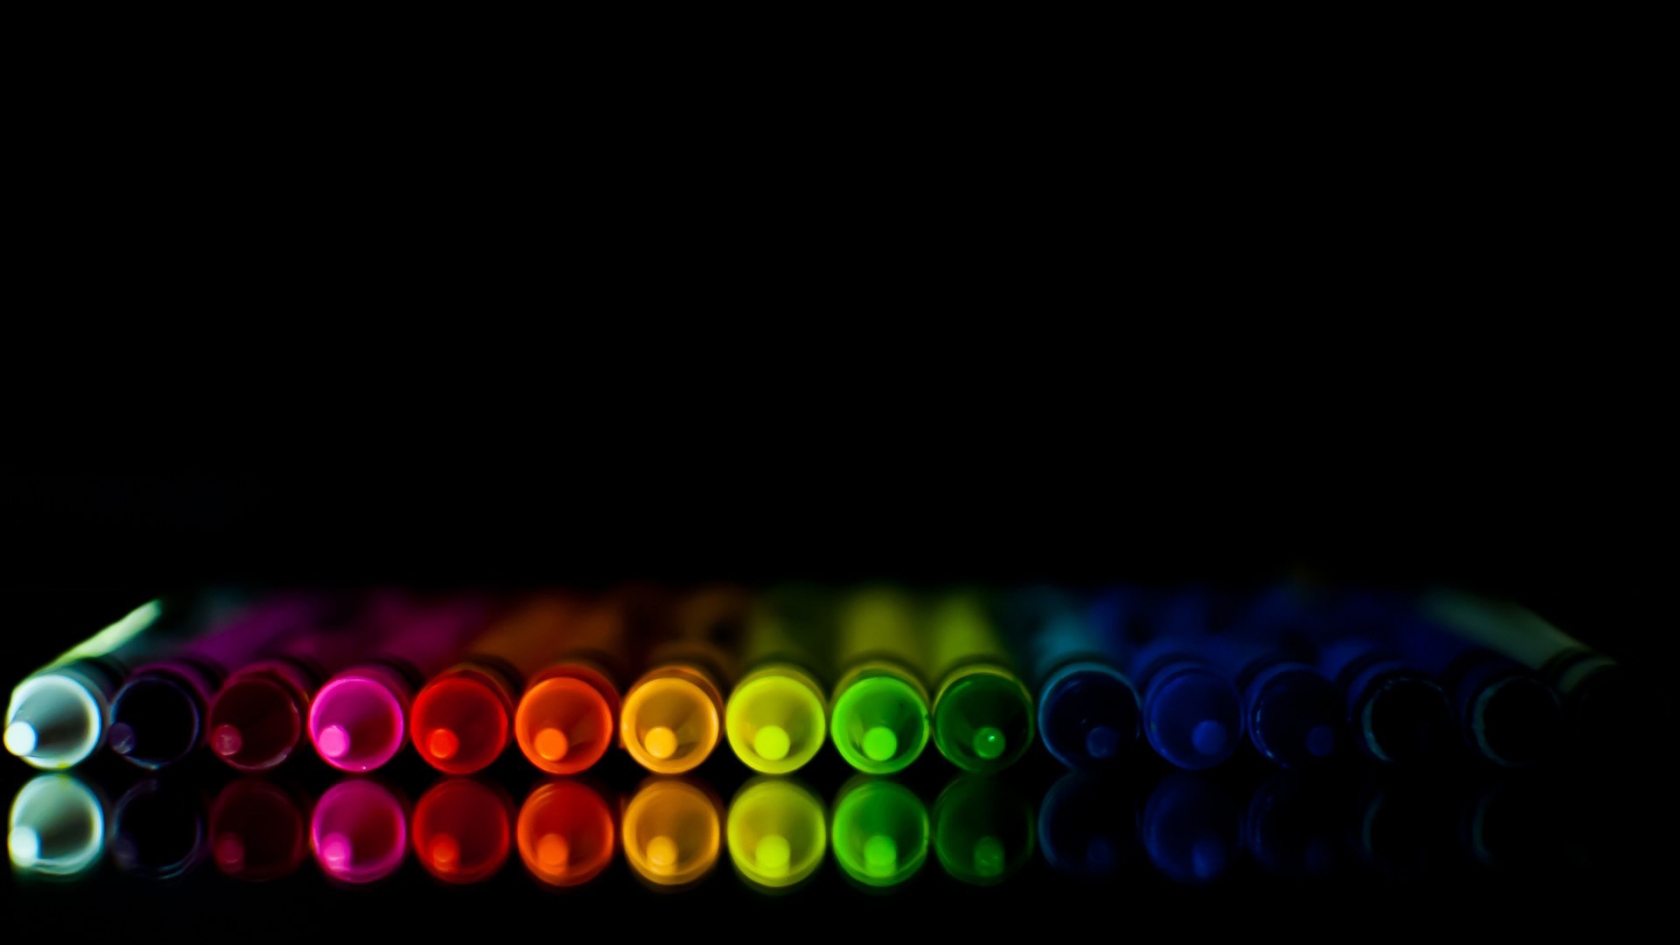 Crayons for 1680 x 945 HDTV resolution